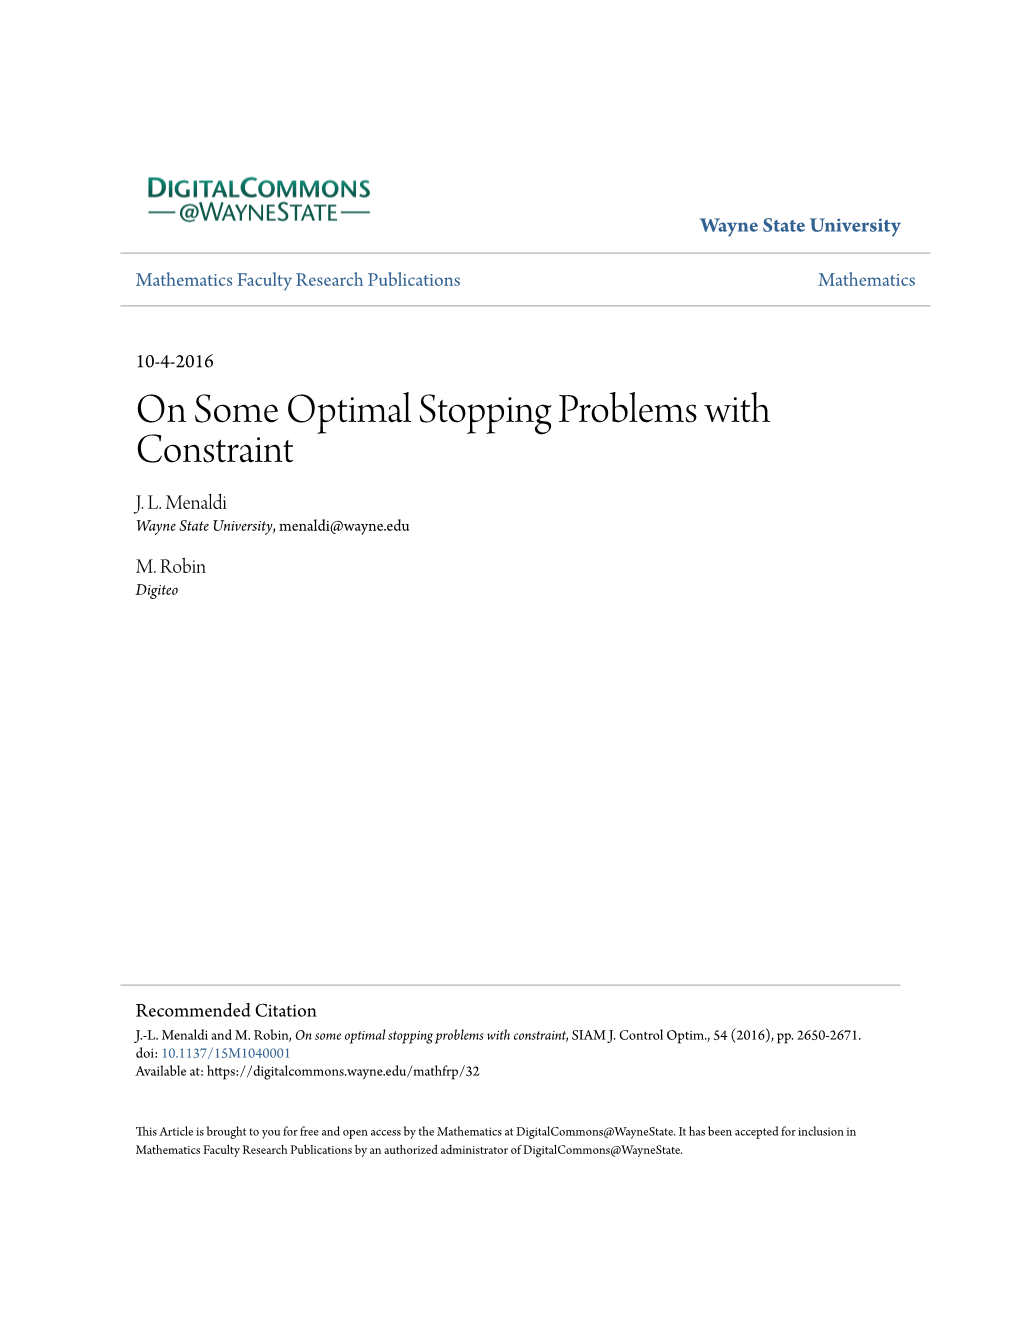 On Some Optimal Stopping Problems with Constraint J